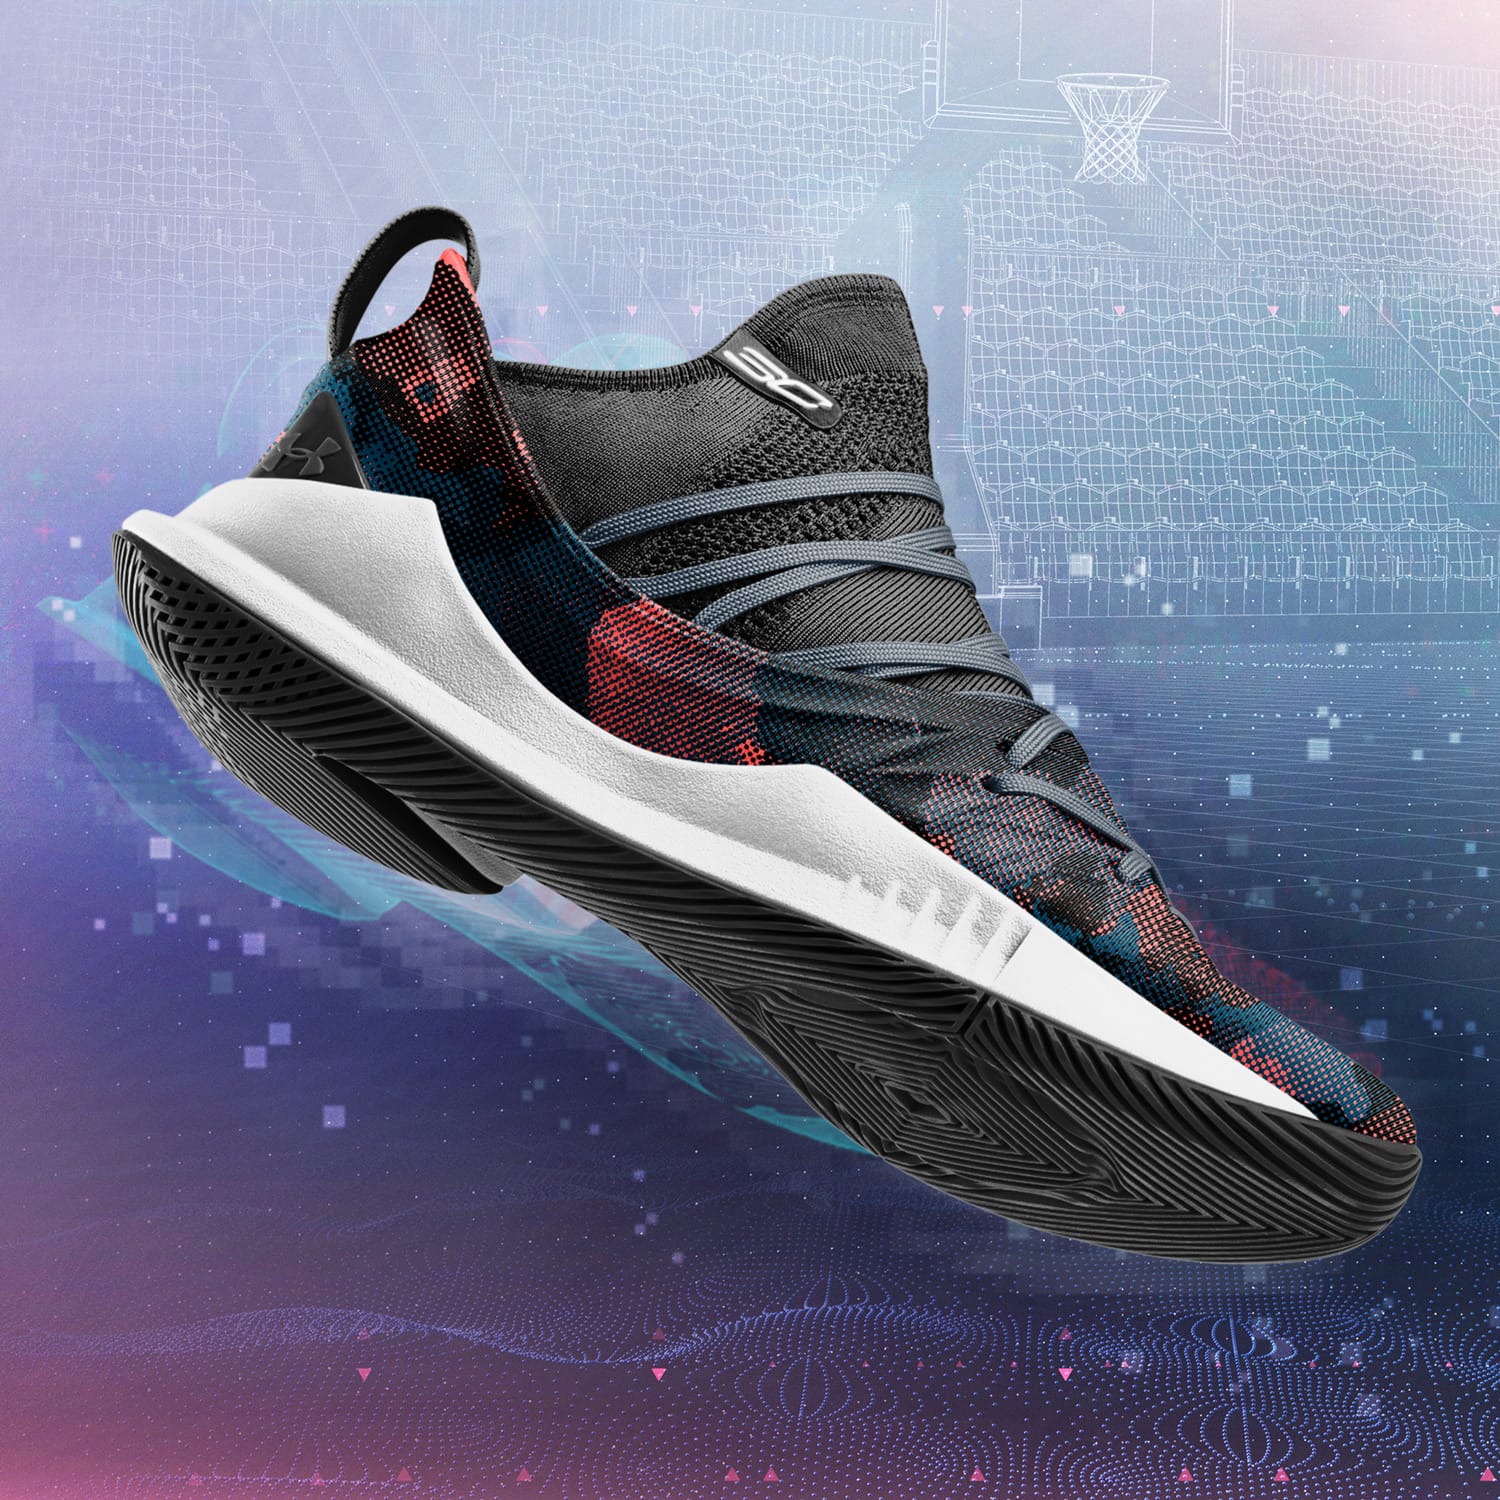 Under Armour Curry 5 ICON Footwear 